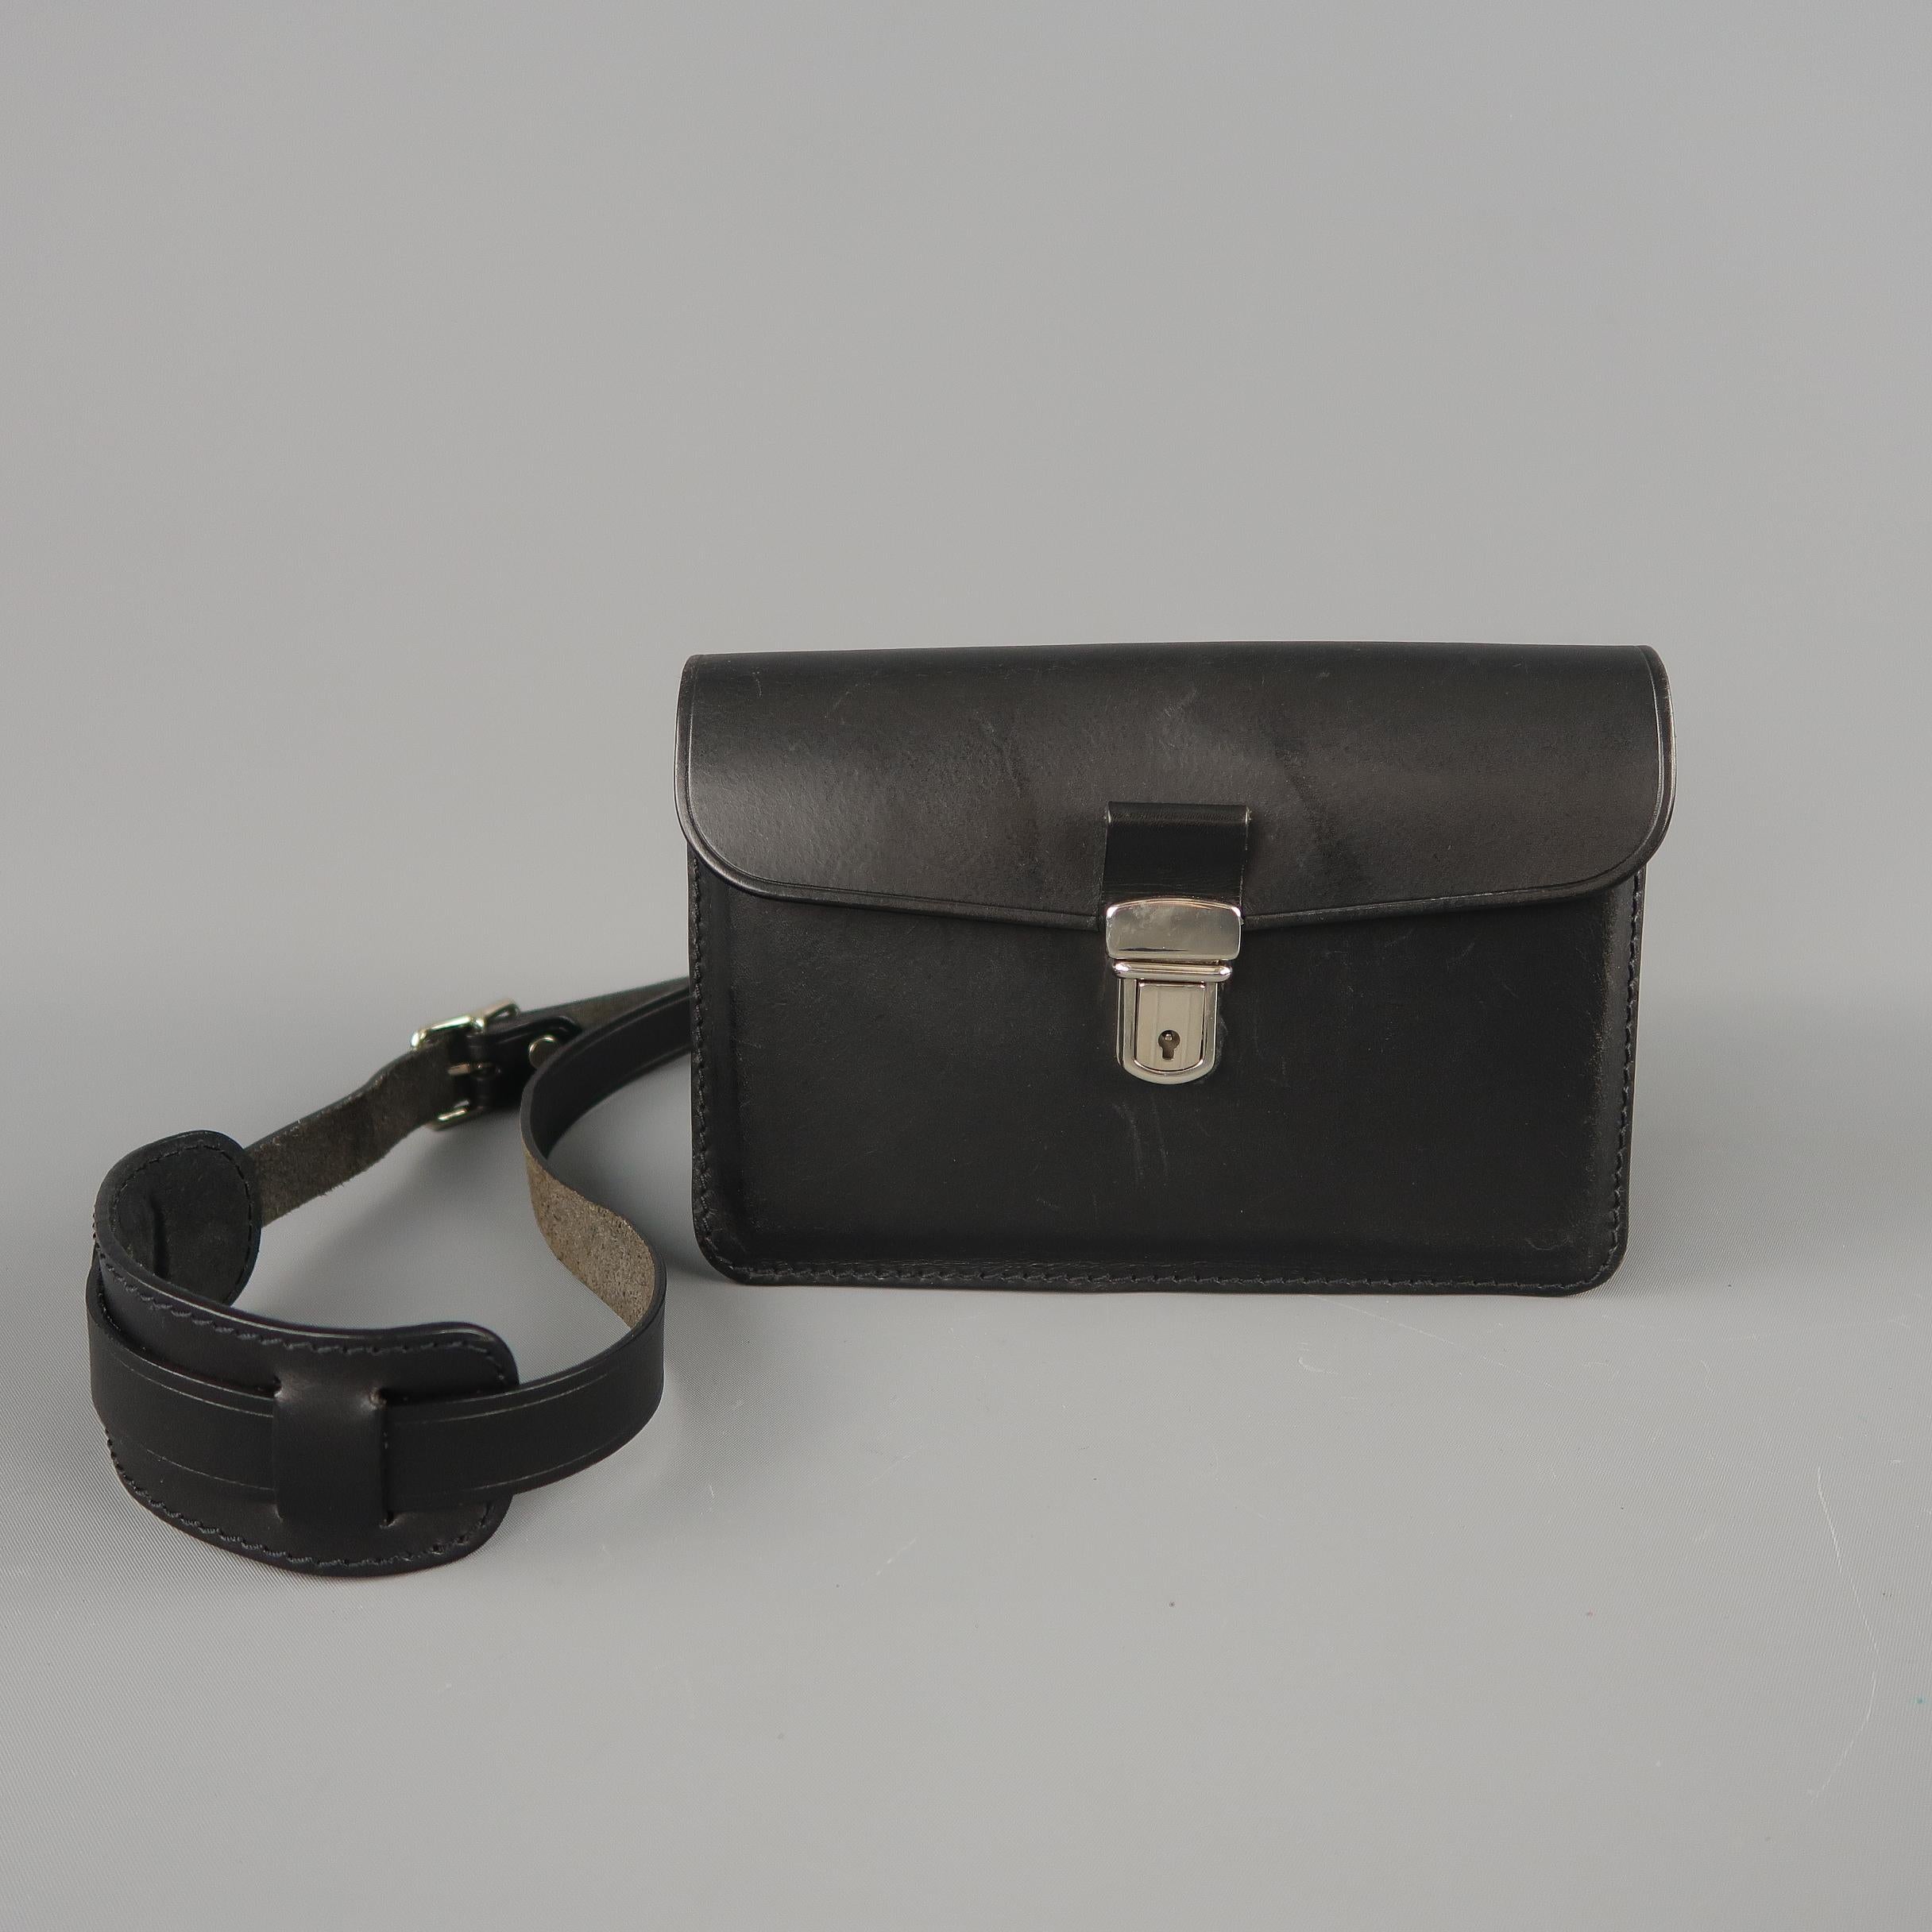 COMME des GARCONS mini satchel comes in structured black leather with a silver tone button snap flap closure, zip top, and detachable strap.
 
Excellent Pre-Owned Condition.
 
Measurements:
 
Length: 8 in.
Width: 2.5 in.
Height: 5.5 in.
Drop: 26 in.